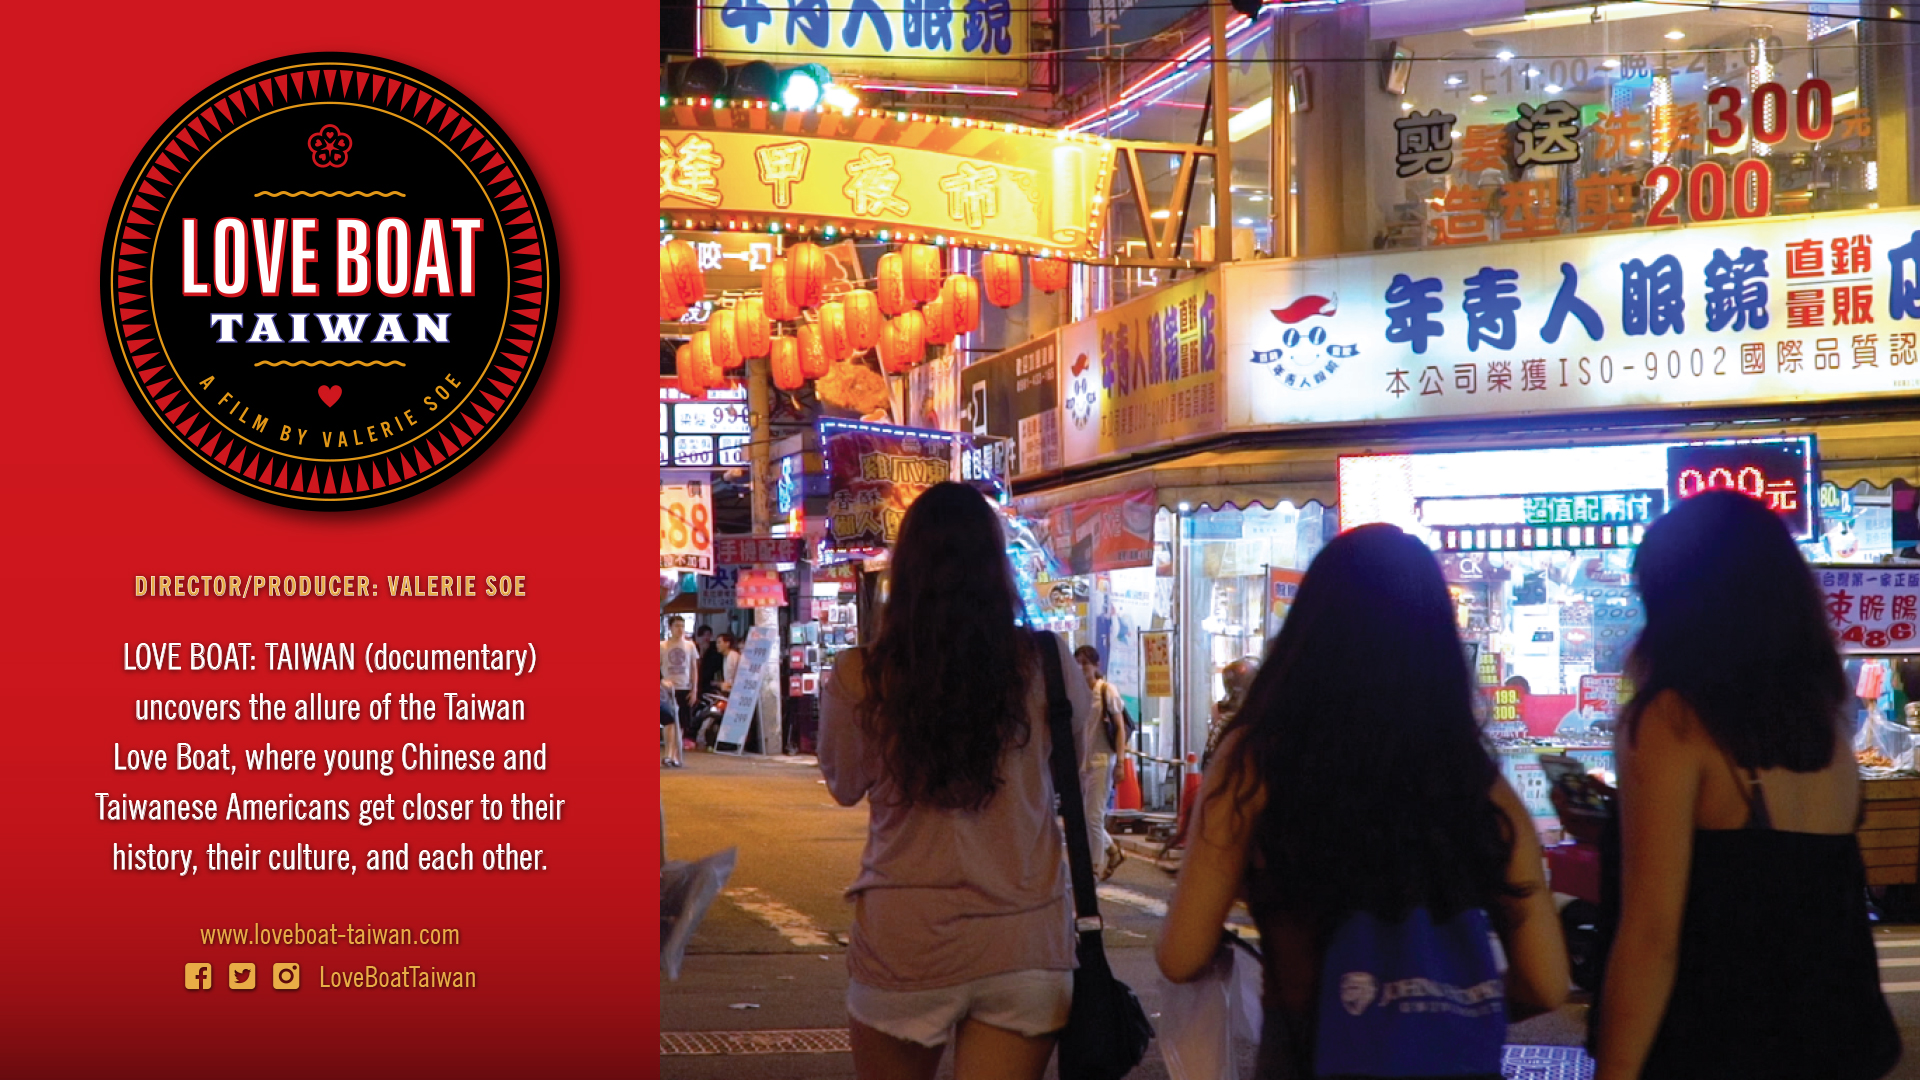 “LOVE BOAT: TAIWAN” - a film by Valerie Soe. A film poster with a red background and the film’s black and gold round logo. On the right is a film still image featuring three female student tourists with long black hair walking down a brightly lit market street at night in Taiwan. The poster text reads, “LOVE BOAT: TAIWAN” director/producer Valerie Soe. “LOVE BOAT: TAIWAN” (documentary) uncovers the allure of the Taiwan Love Boat, where young Chinese and Taiwanese Americans get closer to their history, their culture, and each other.